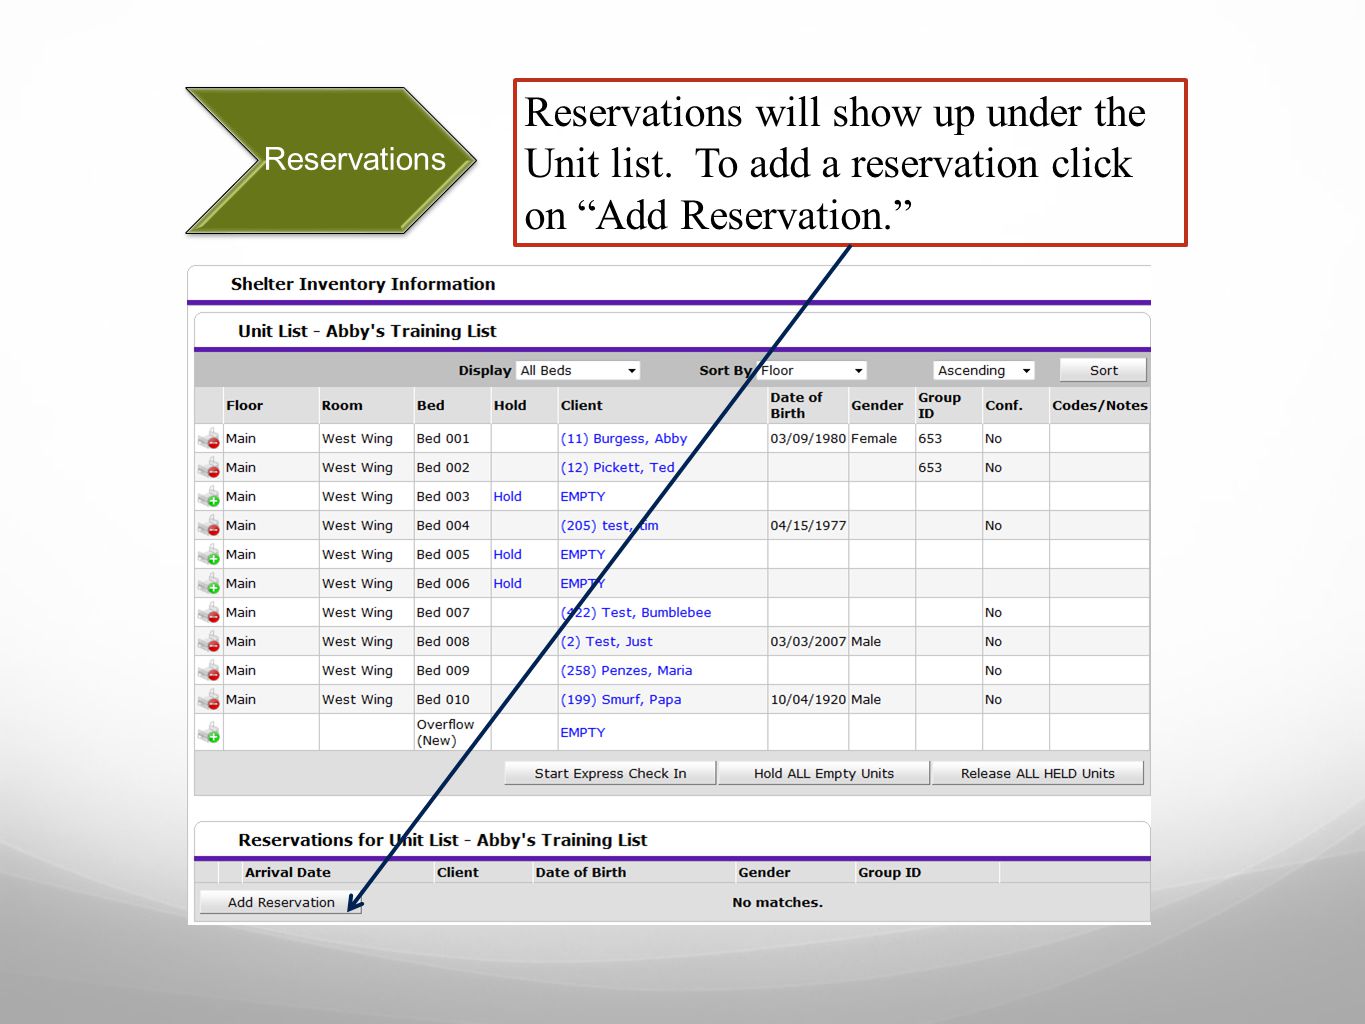 Reservations Reservations will show up under the Unit list.